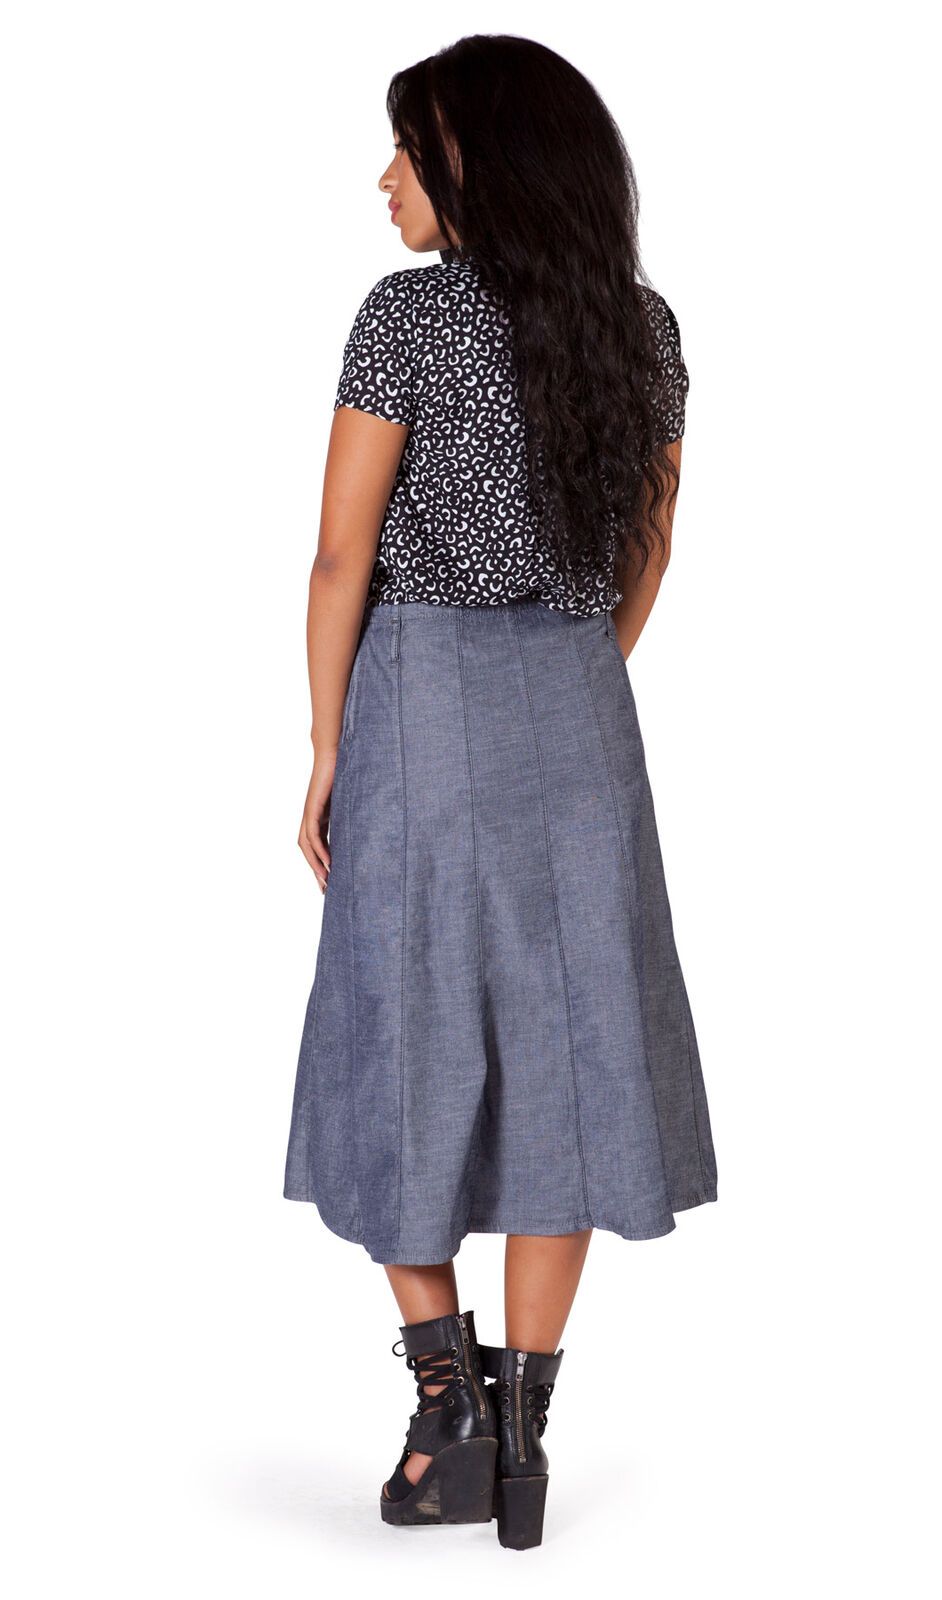 Full length back view of calf-length dark chambray denim skirt with clear view of flared silhouette.